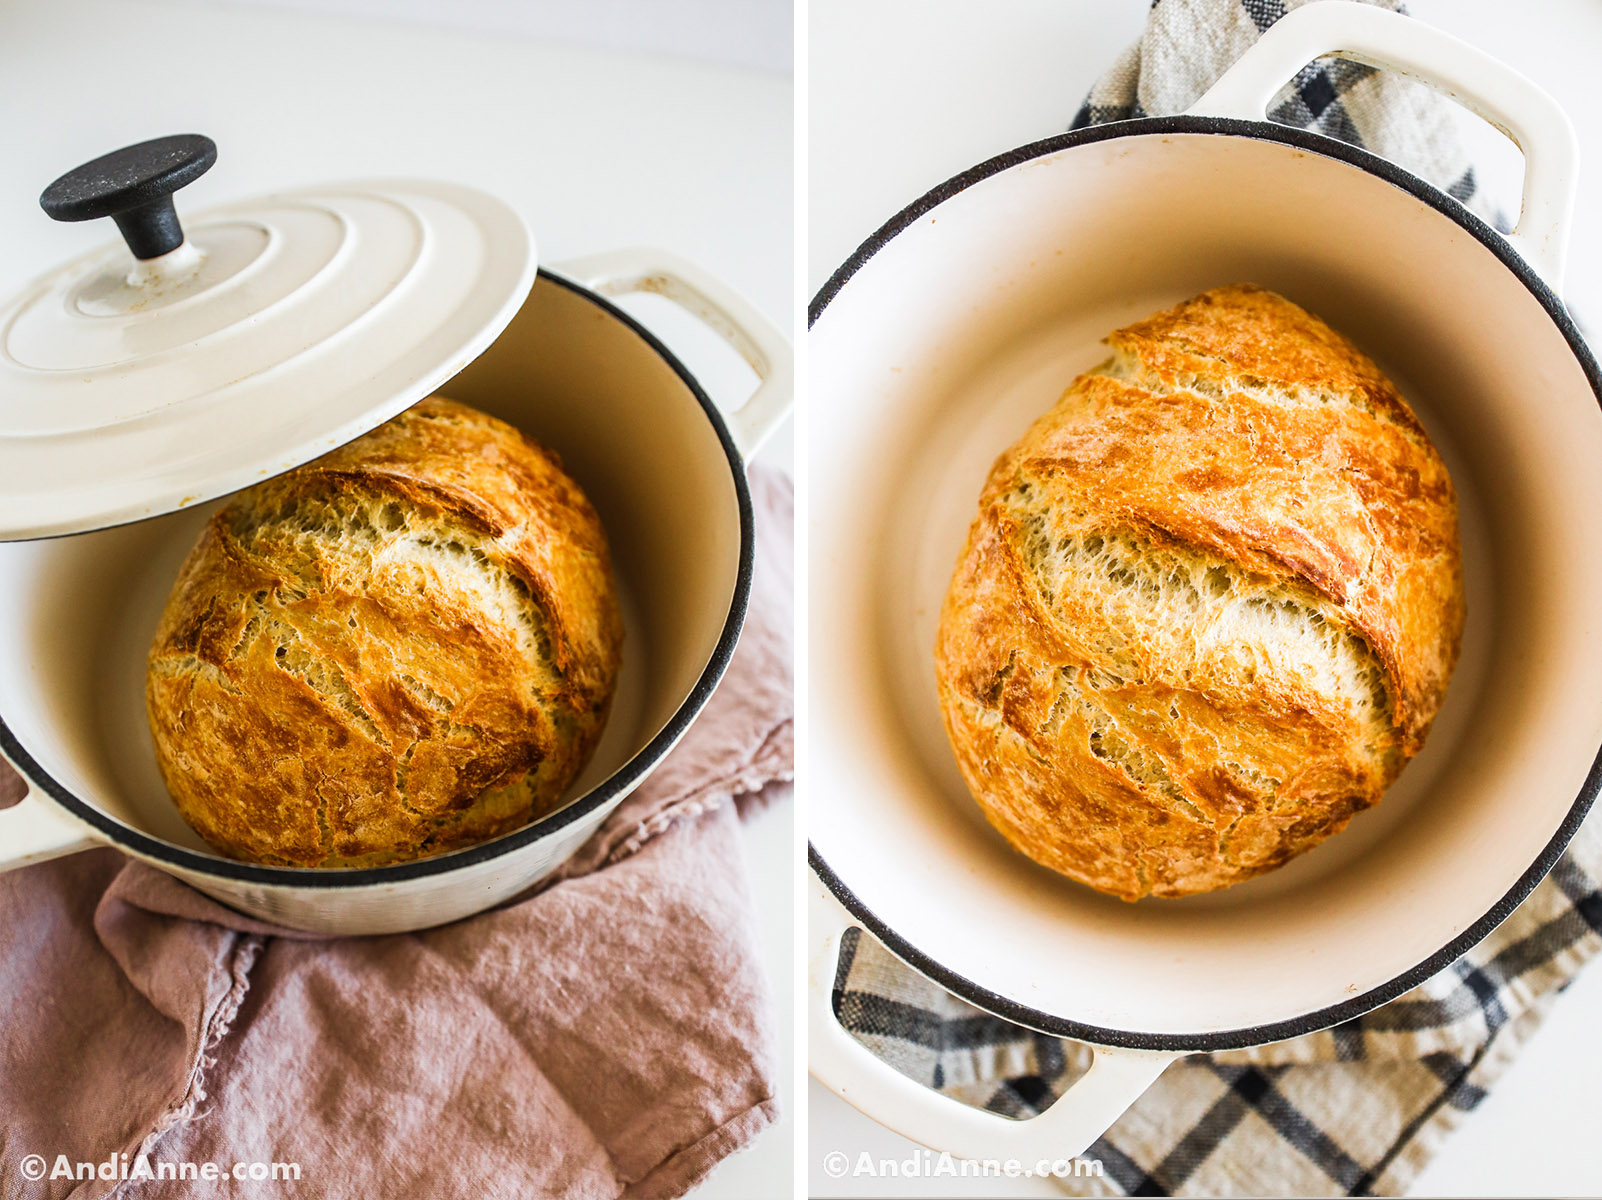 Two images of a white dutch oven with crusty round bread inside.